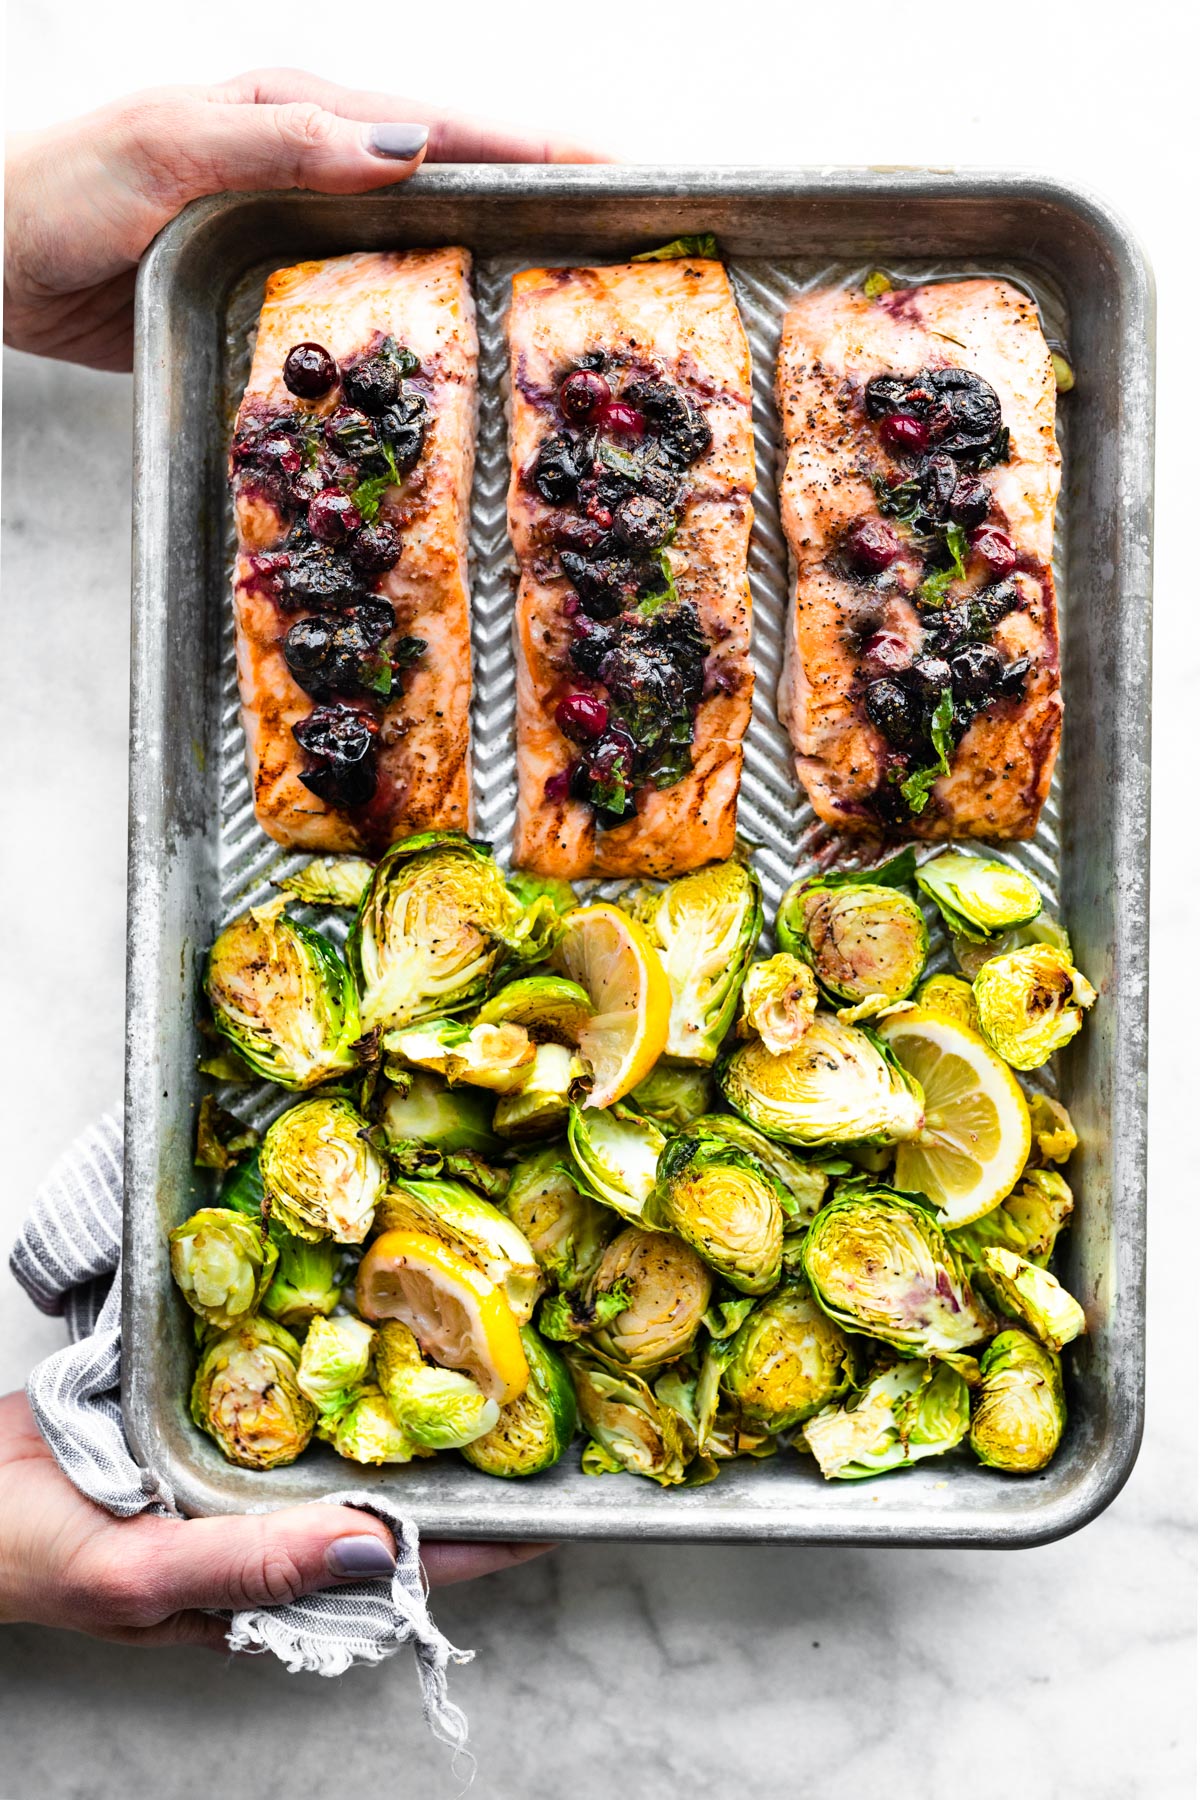 A sheet pan with three salmon filets topped with a blueberry mixture and Brussels sprouts.